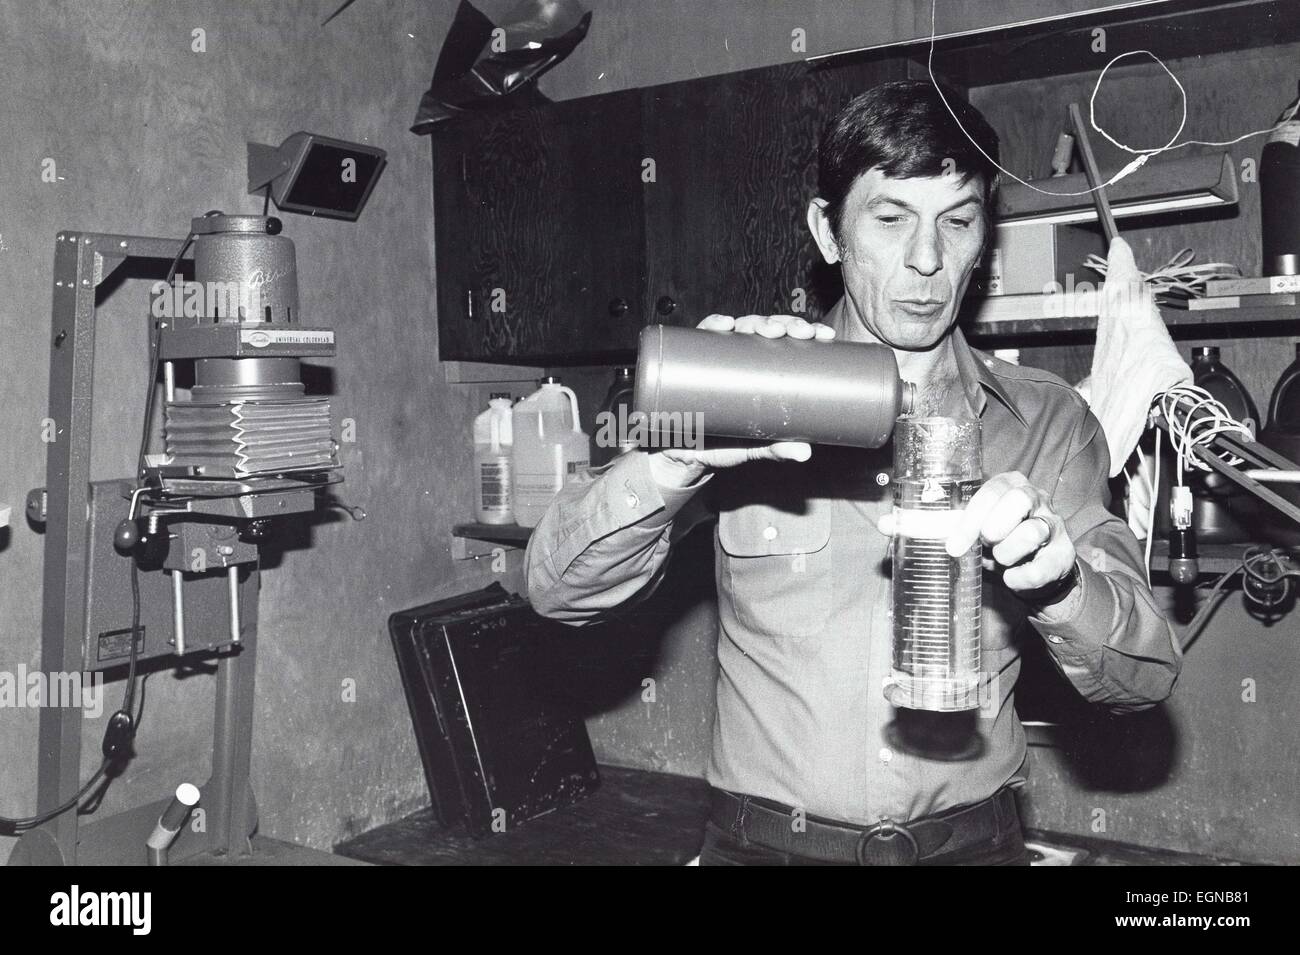 File. 27th Feb, 2015. LEONARD NIMOY, the actor who won a global following as Mr. Spock, the alien first officer of the Starship Enterprise in the television and movie series 'Star Trek, ' died on Friday morning at his home in the Bel Air, Los Angeles. He was 83. His wife, Susan Bay Nimoy, confirmed his death, saying the cause was end-stage chronic obstructive pulmonary disease. Pictured - Leonard Nimoy c. 1980's - Los Angeles, California, U.S. - Working in photo lab producing photos he captured. © Globe Photos/ZUMAPRESS.com/Alamy Live News Stock Photo